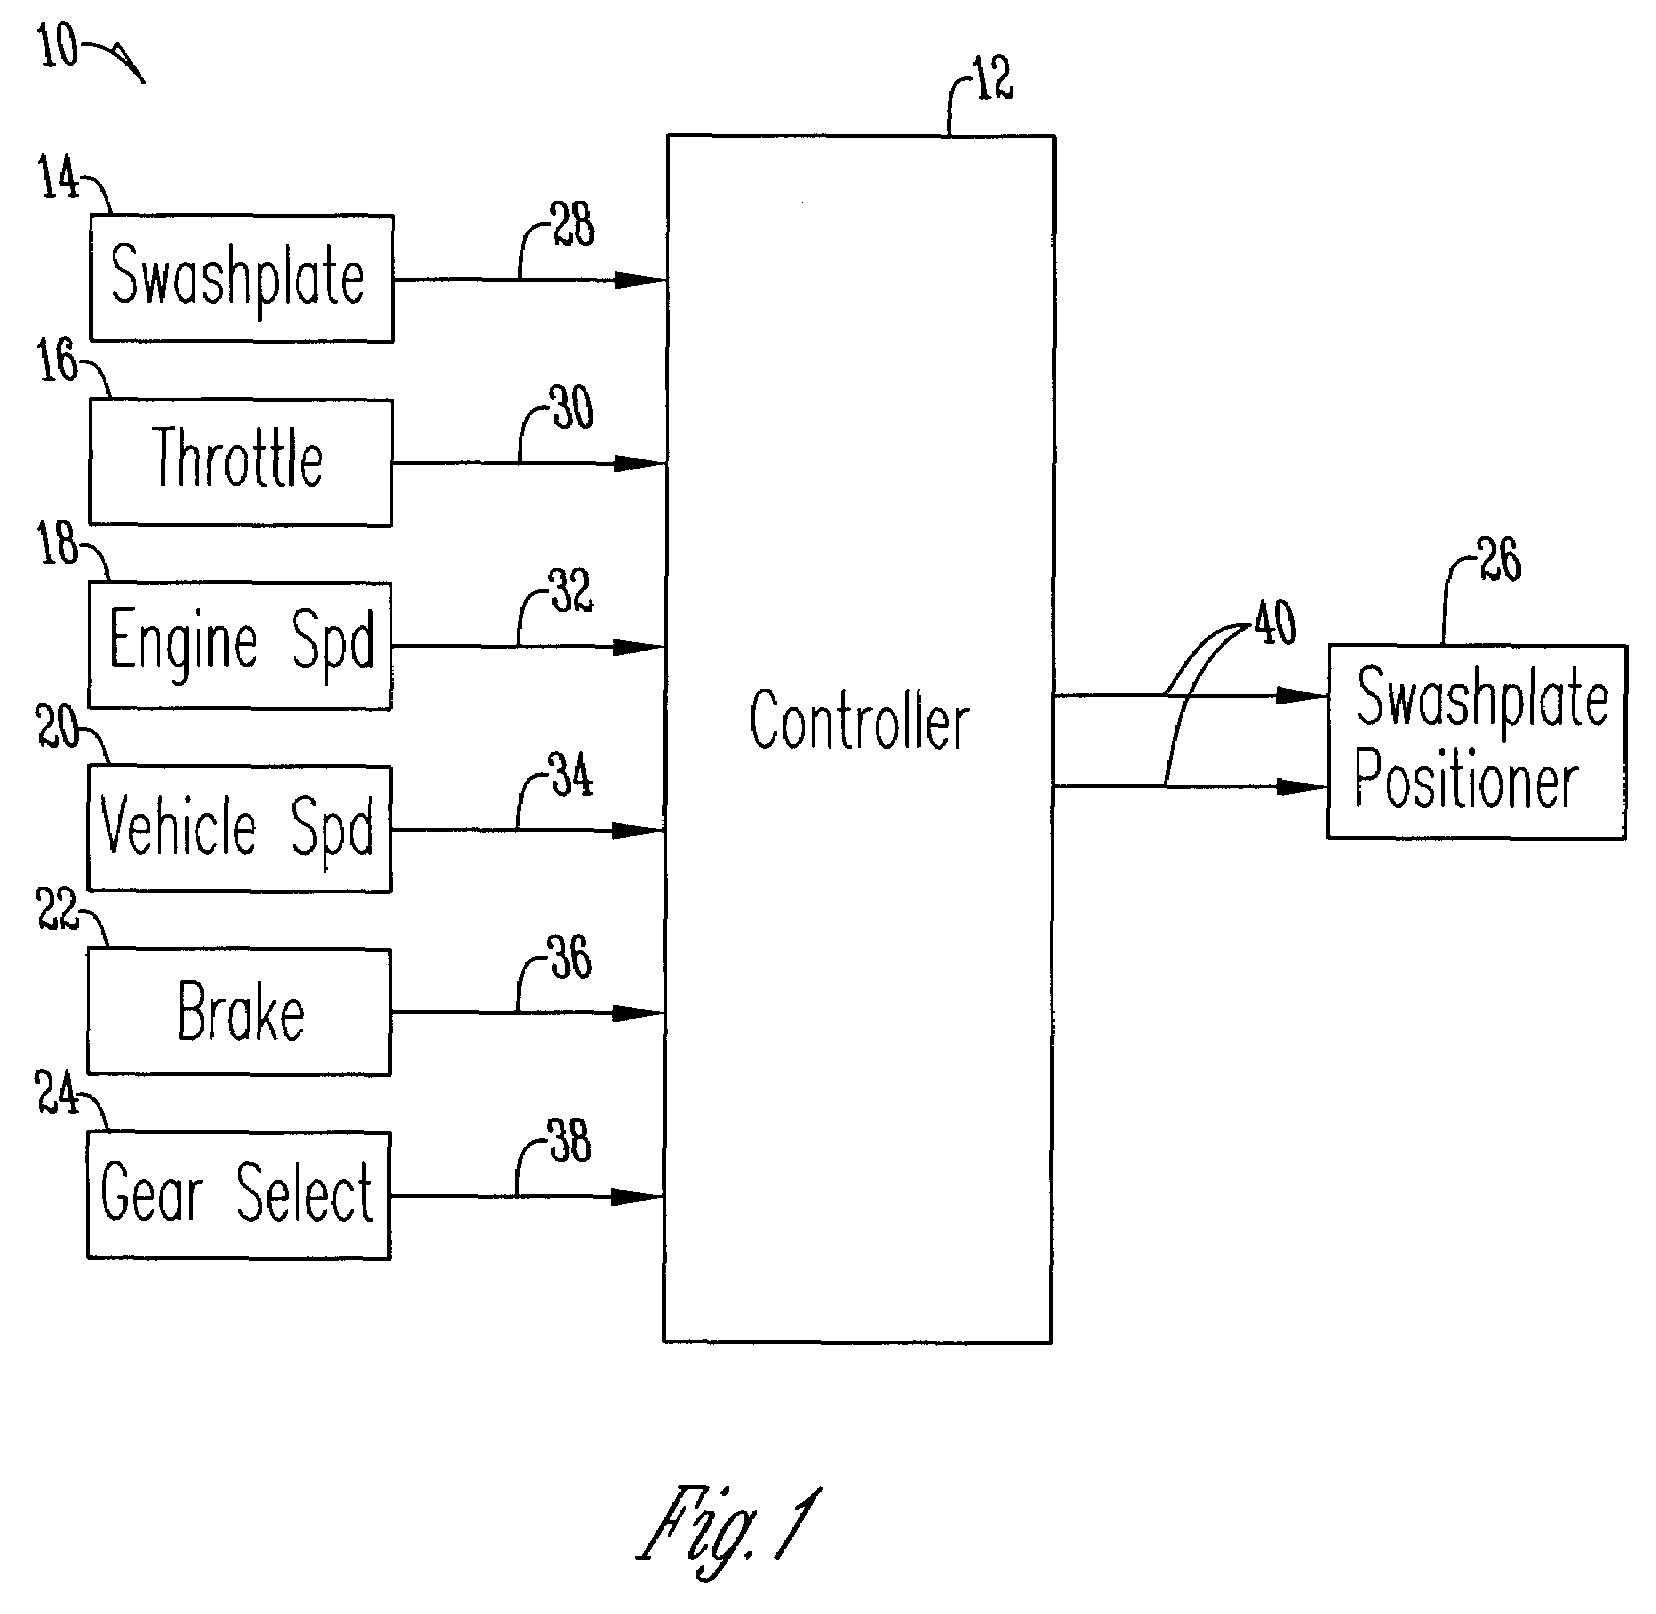 Engine speed control for a low power hydromechanical transmission